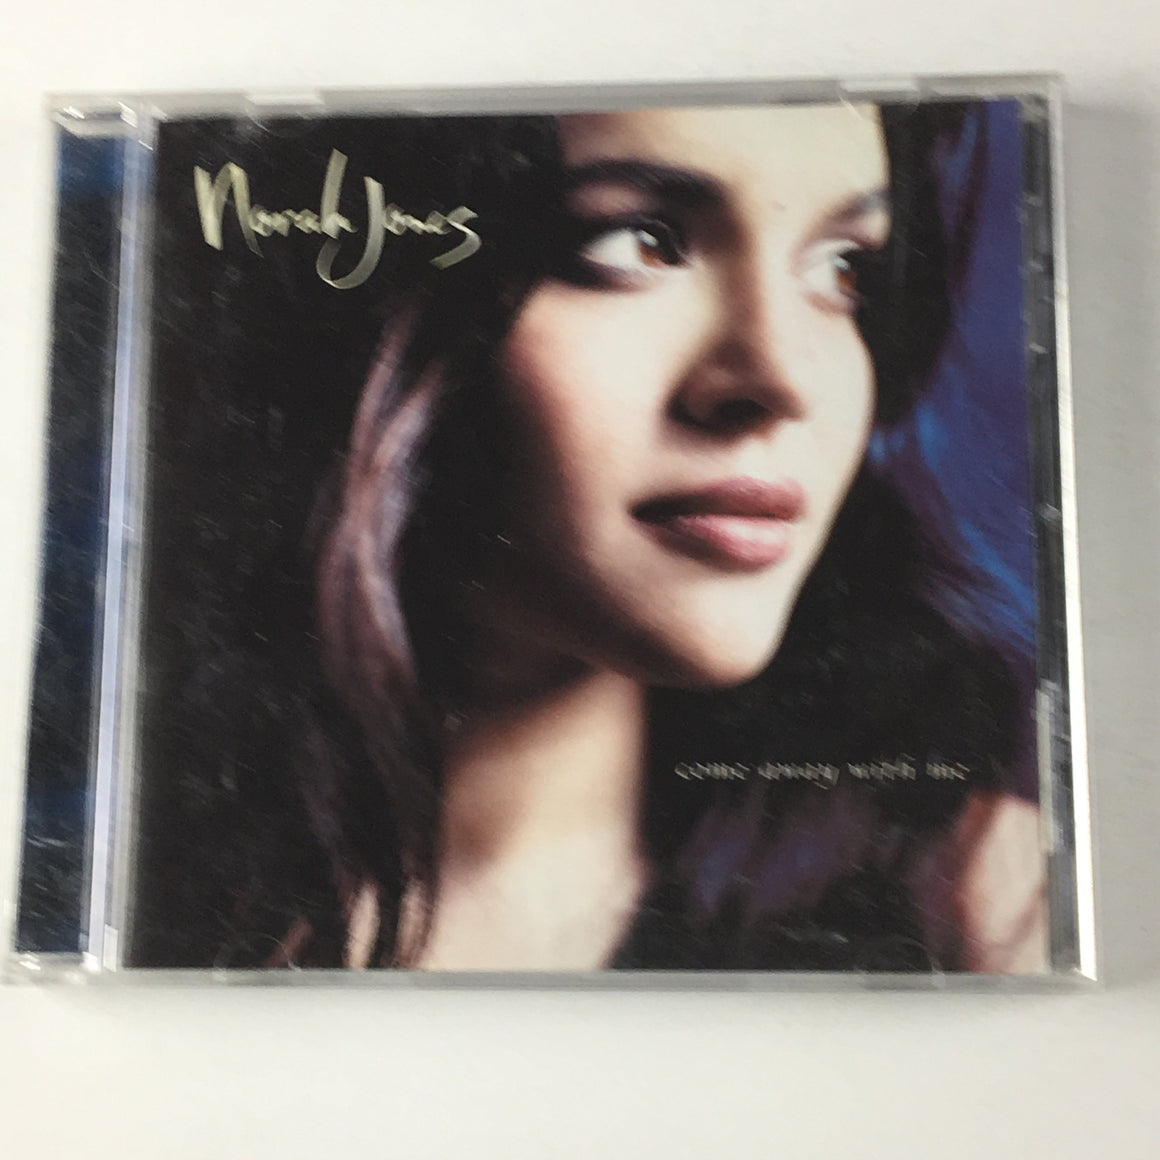 Norah Jones Come Away With Me Used CD VG+\VG+